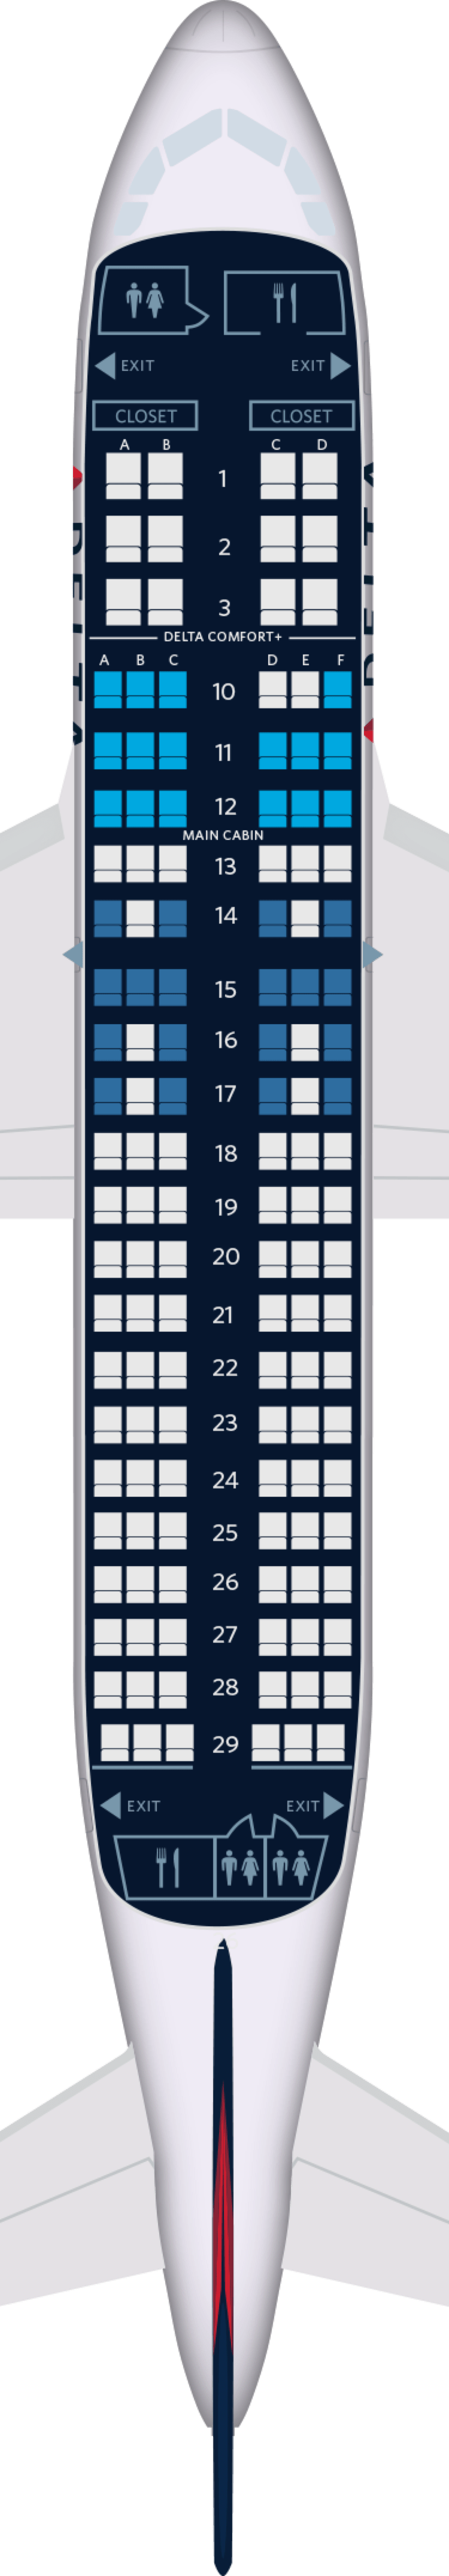 Airbus A319 Aircraft Seat Maps Specs Amenities Delta Air Lines